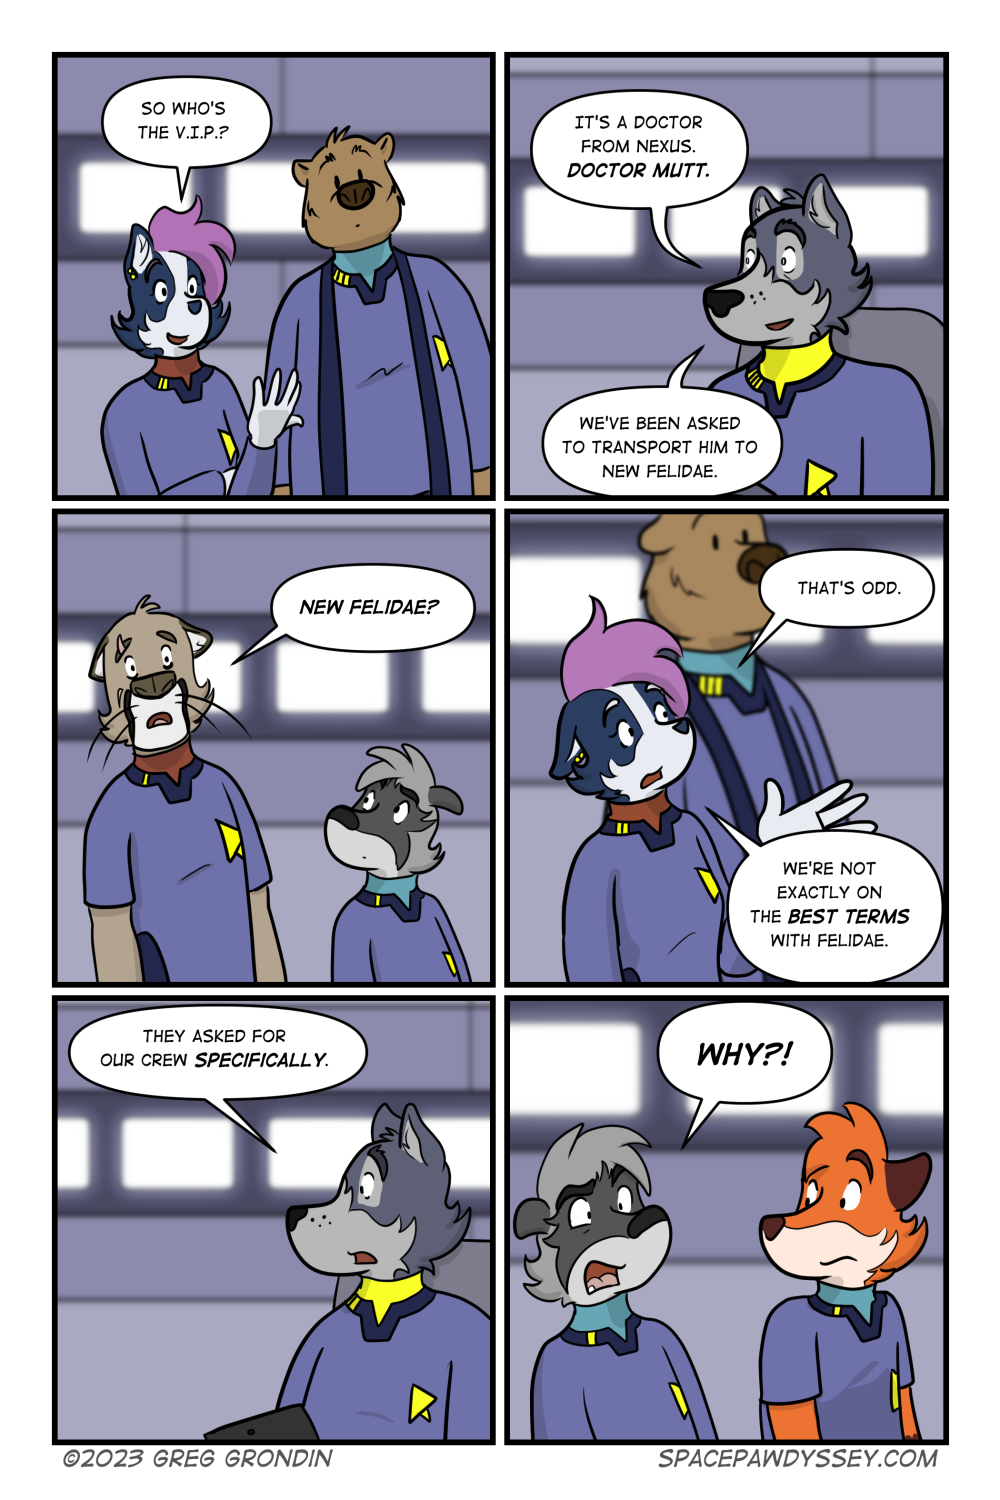 Space Pawdyssey #647